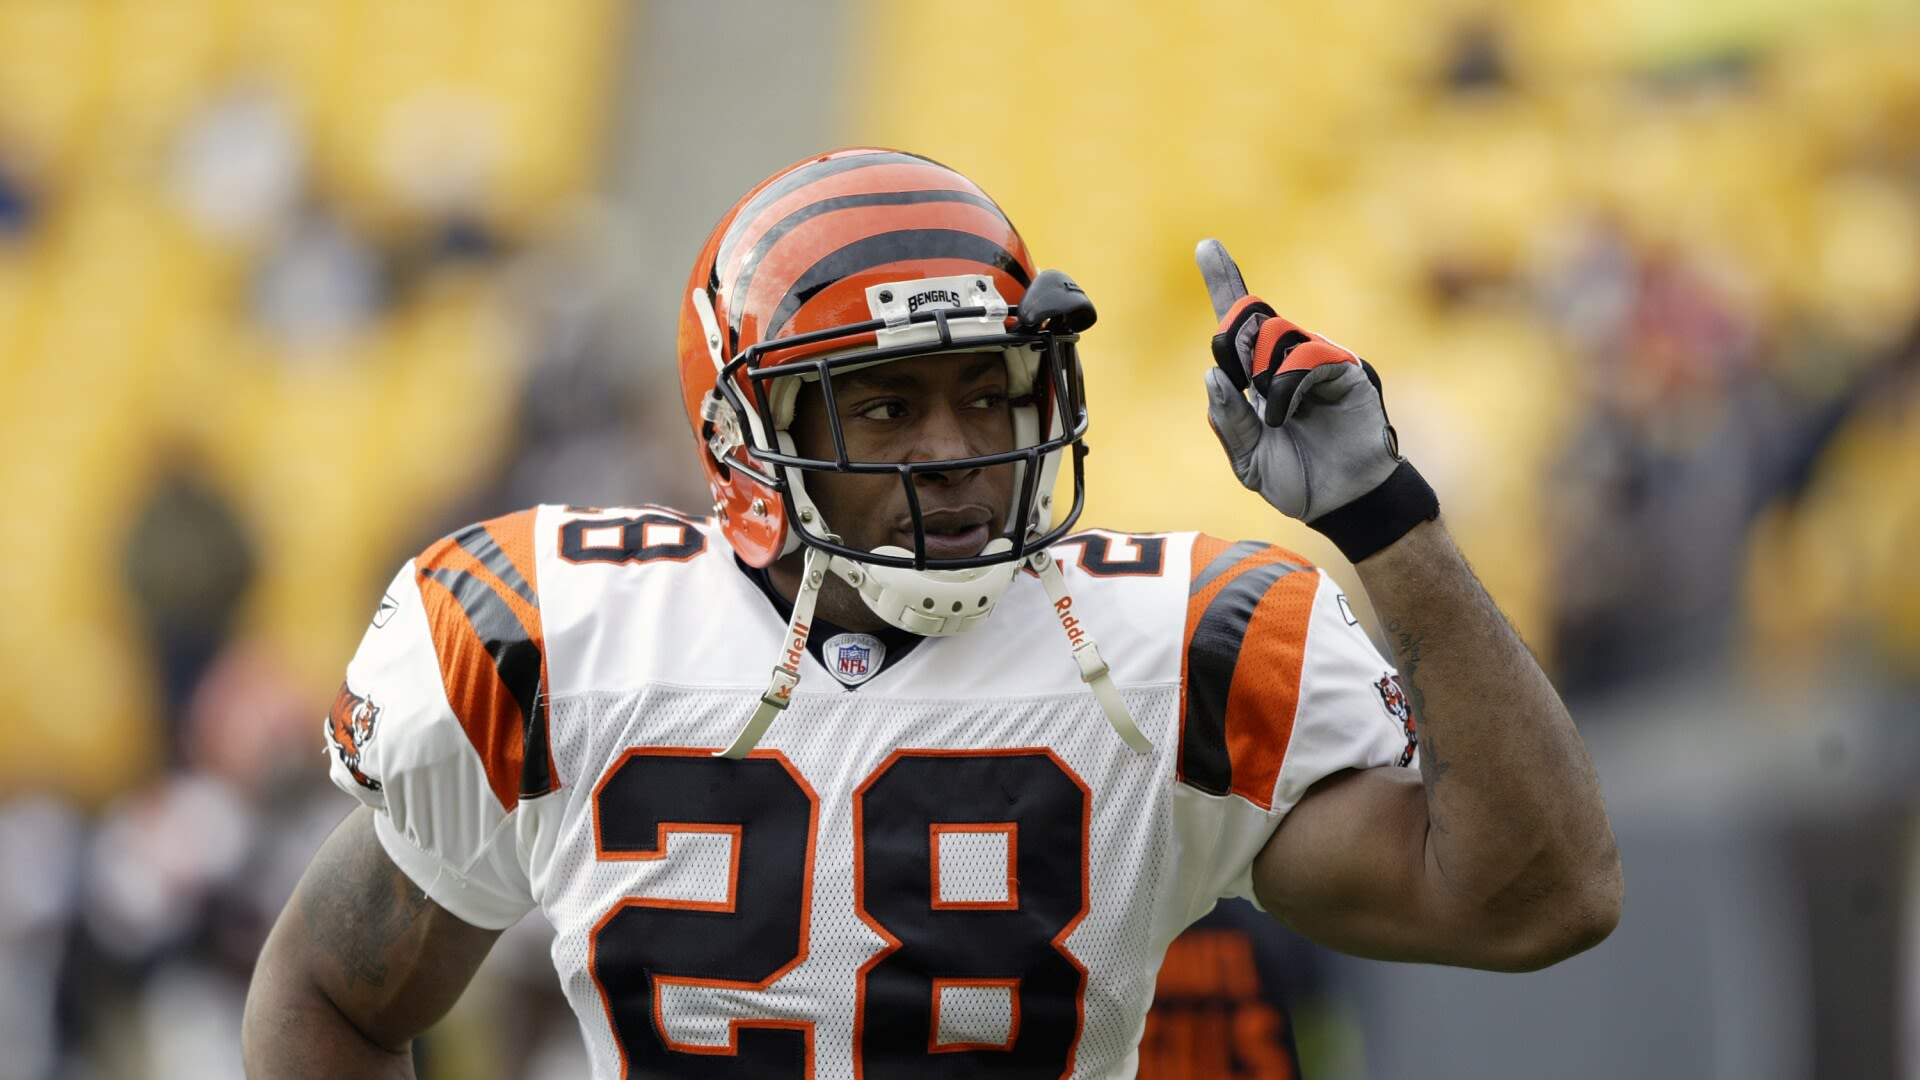 Corey Dillon on election to Bengals Ring of Honor: Time heals everything